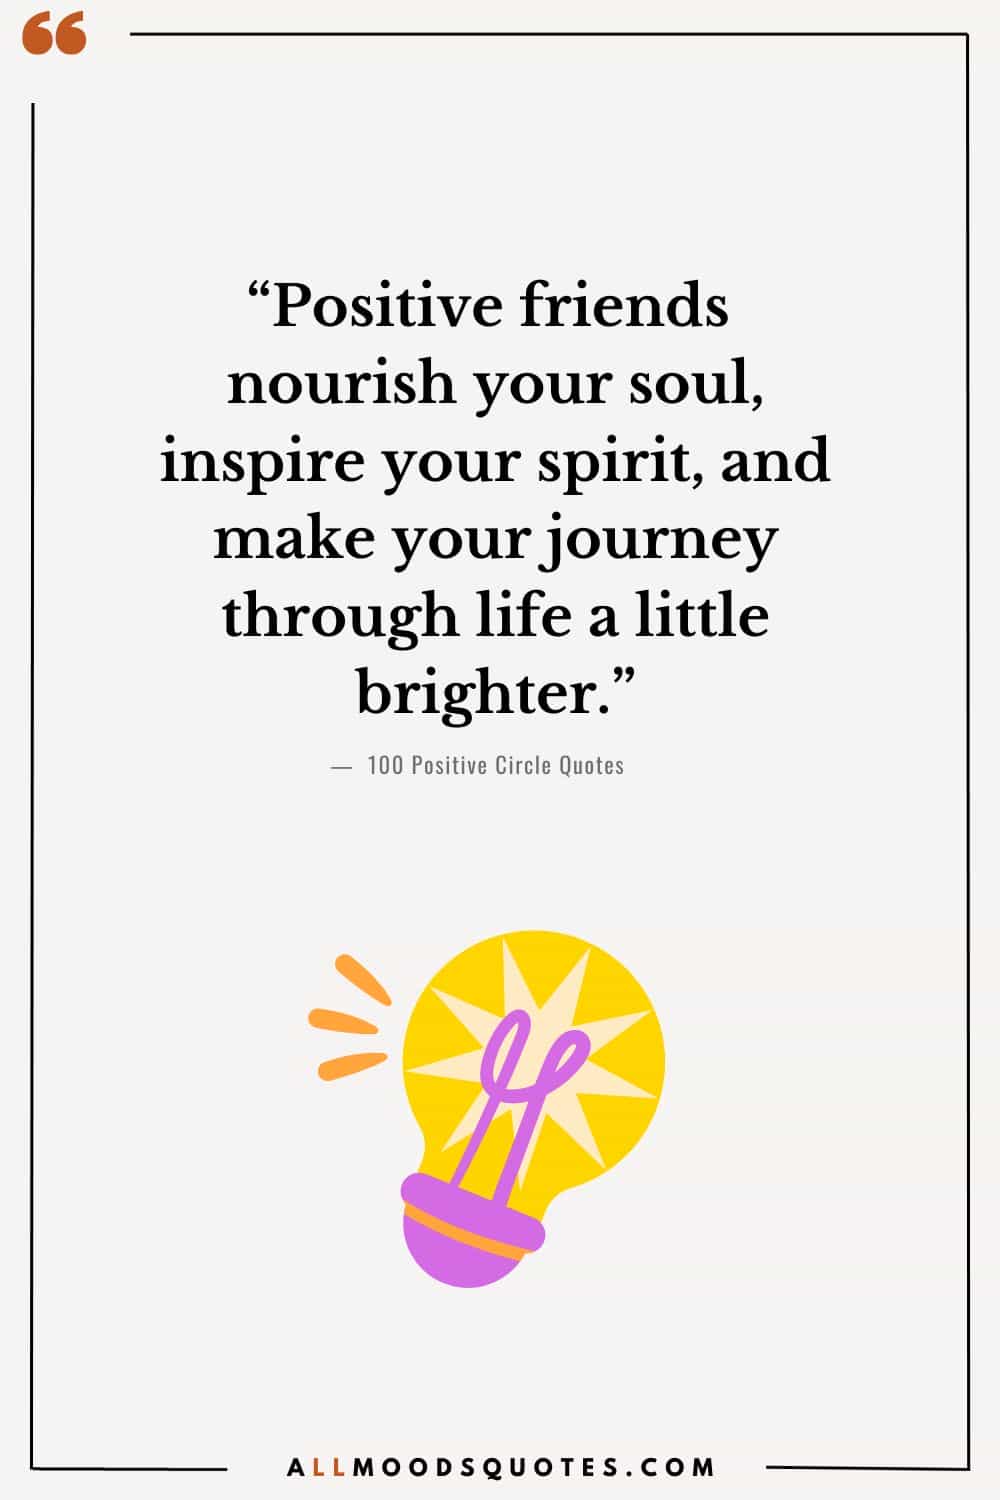 “Positive friends nourish your soul, inspire your spirit, and make your journey through life a little brighter.”